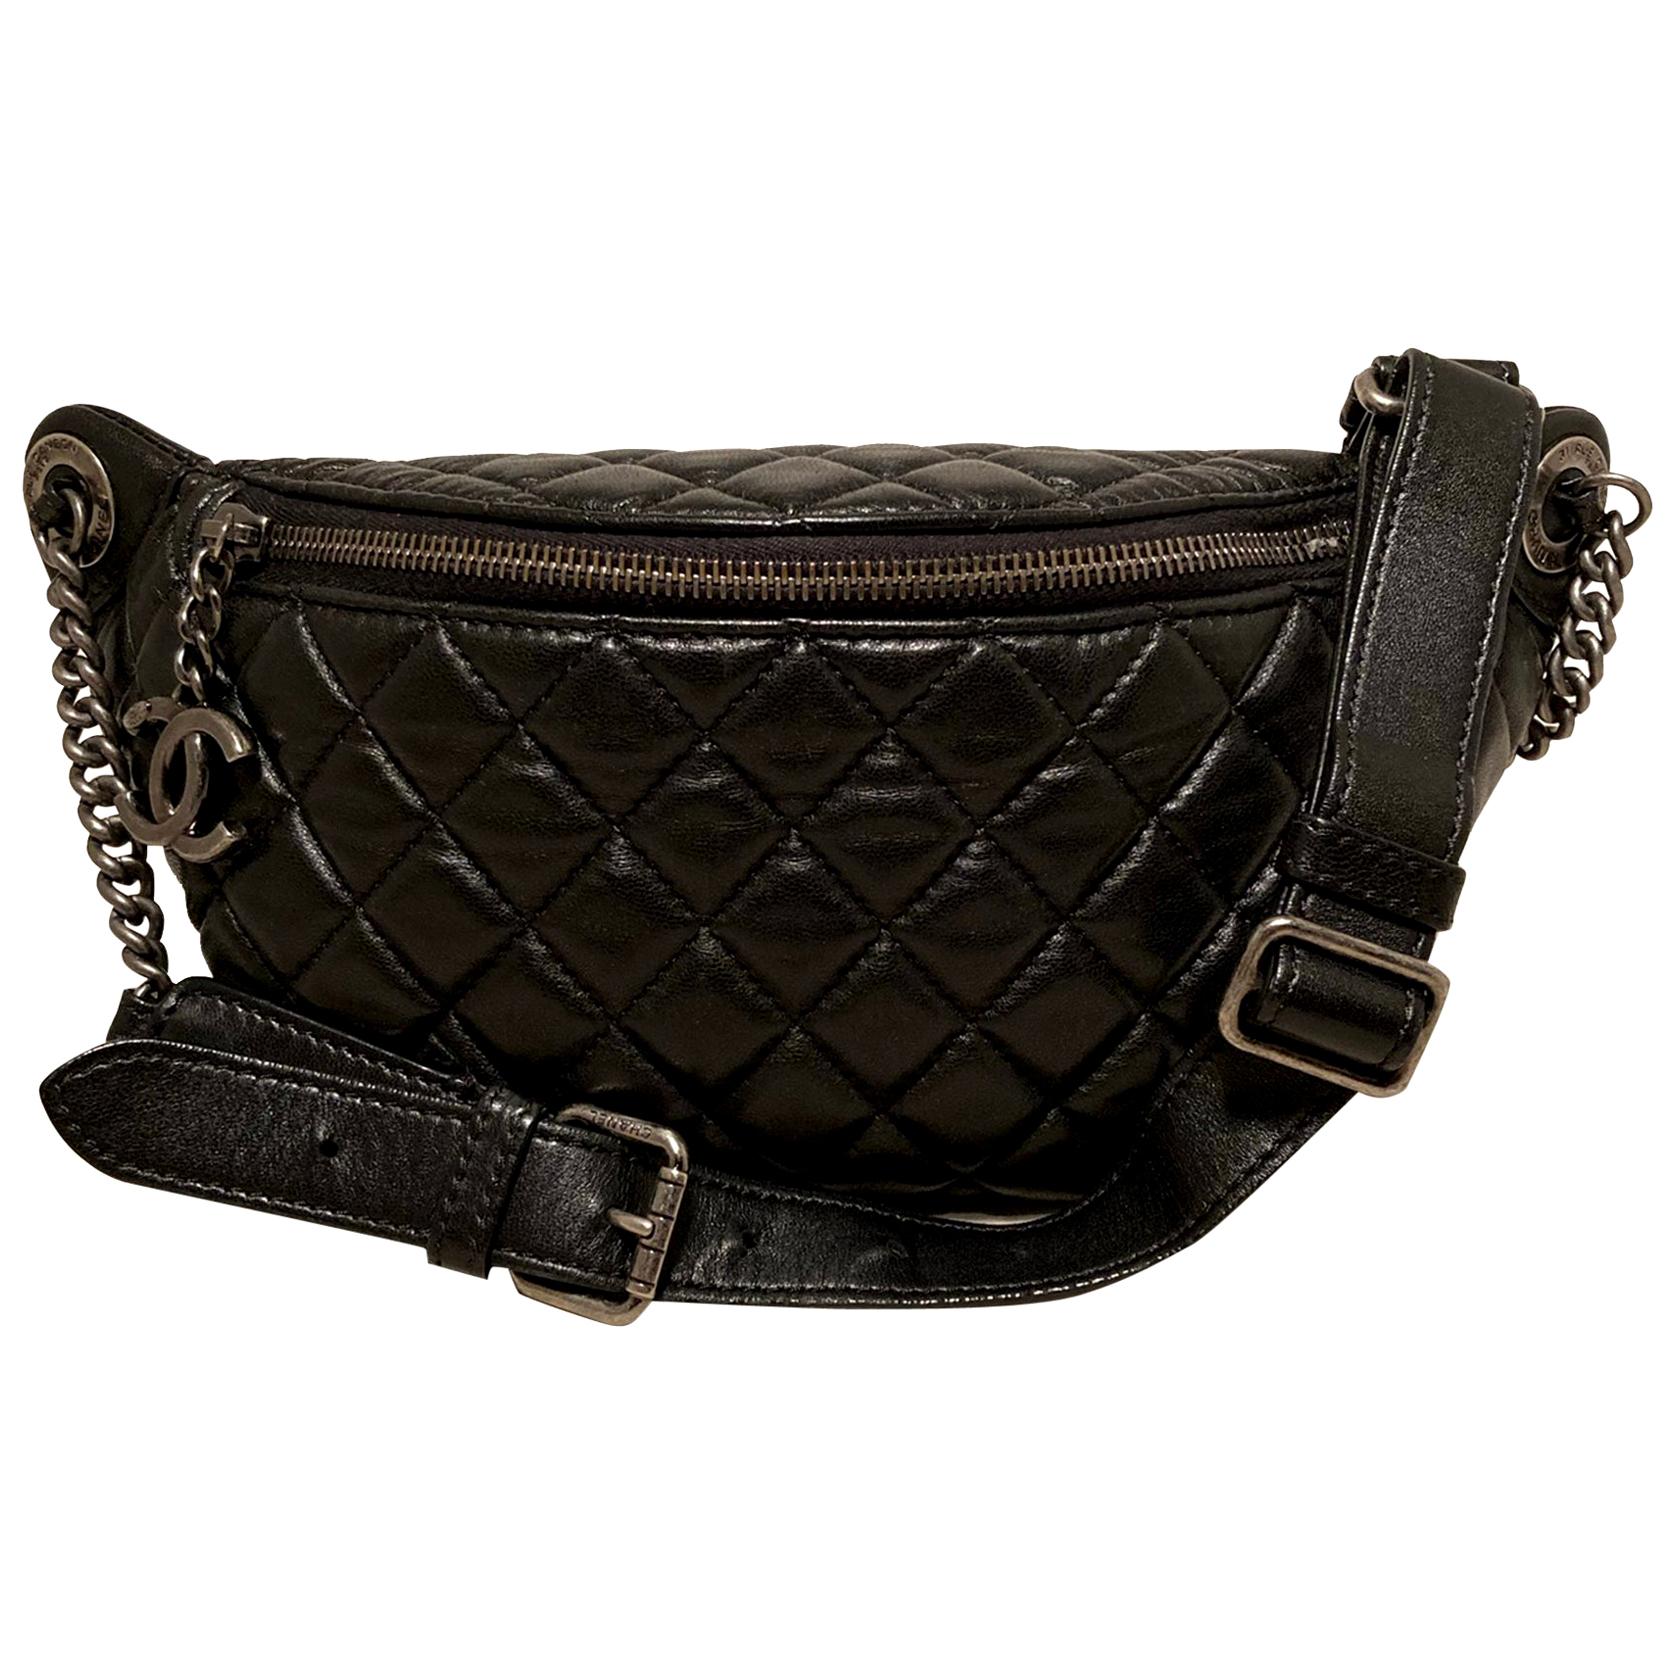 Chanel Quilted Black Leather Banane Fanny Pack Bum Bag